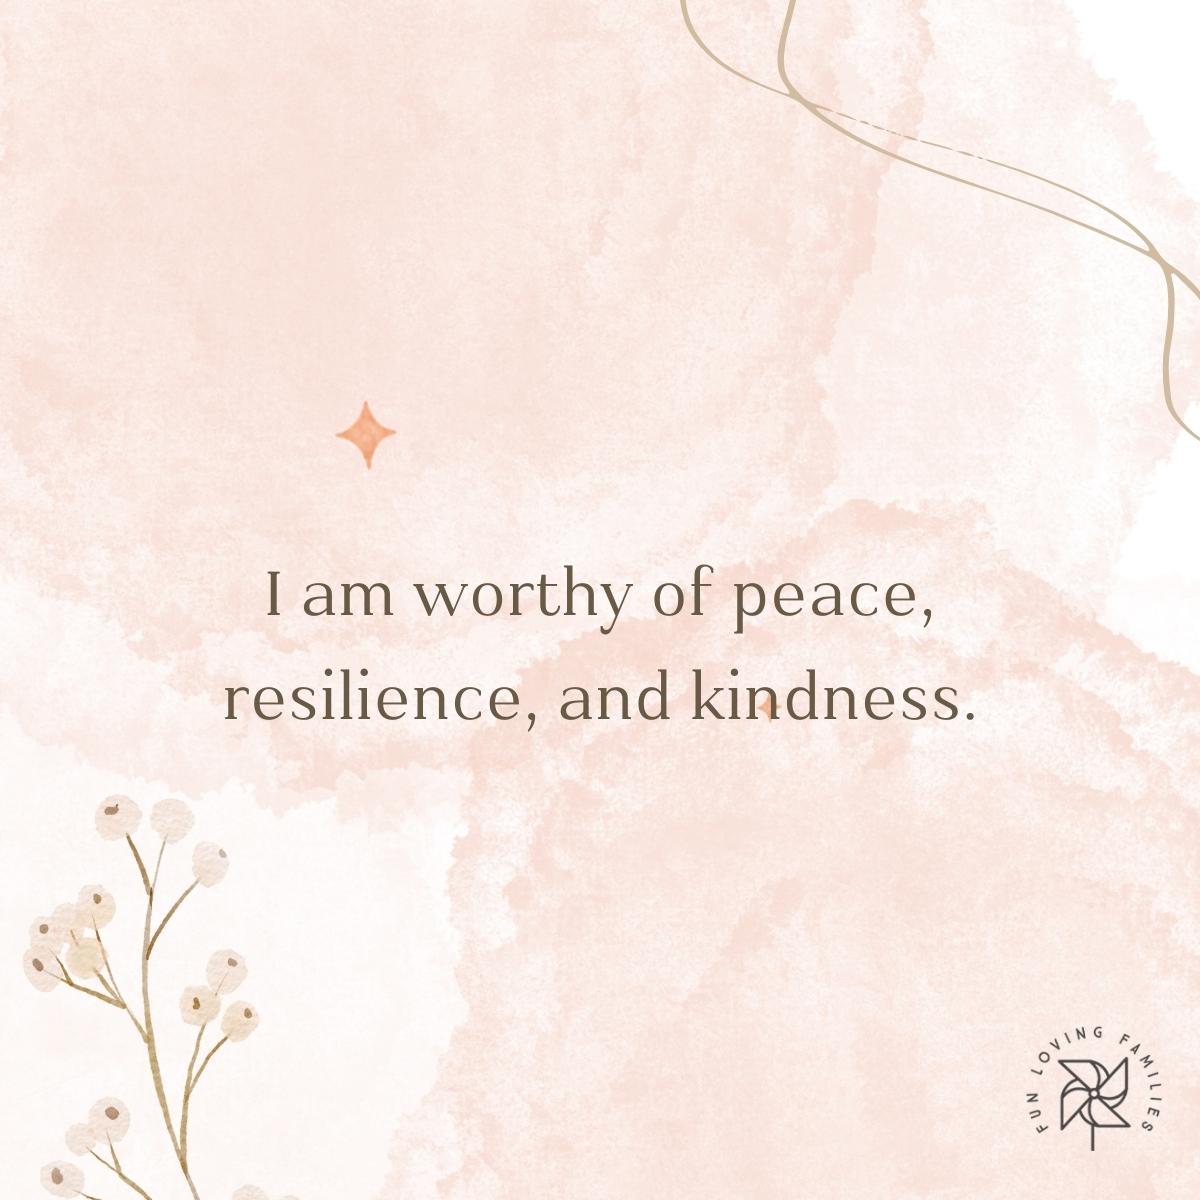 I am worthy of peace, resilience, and kindness affirmation image.